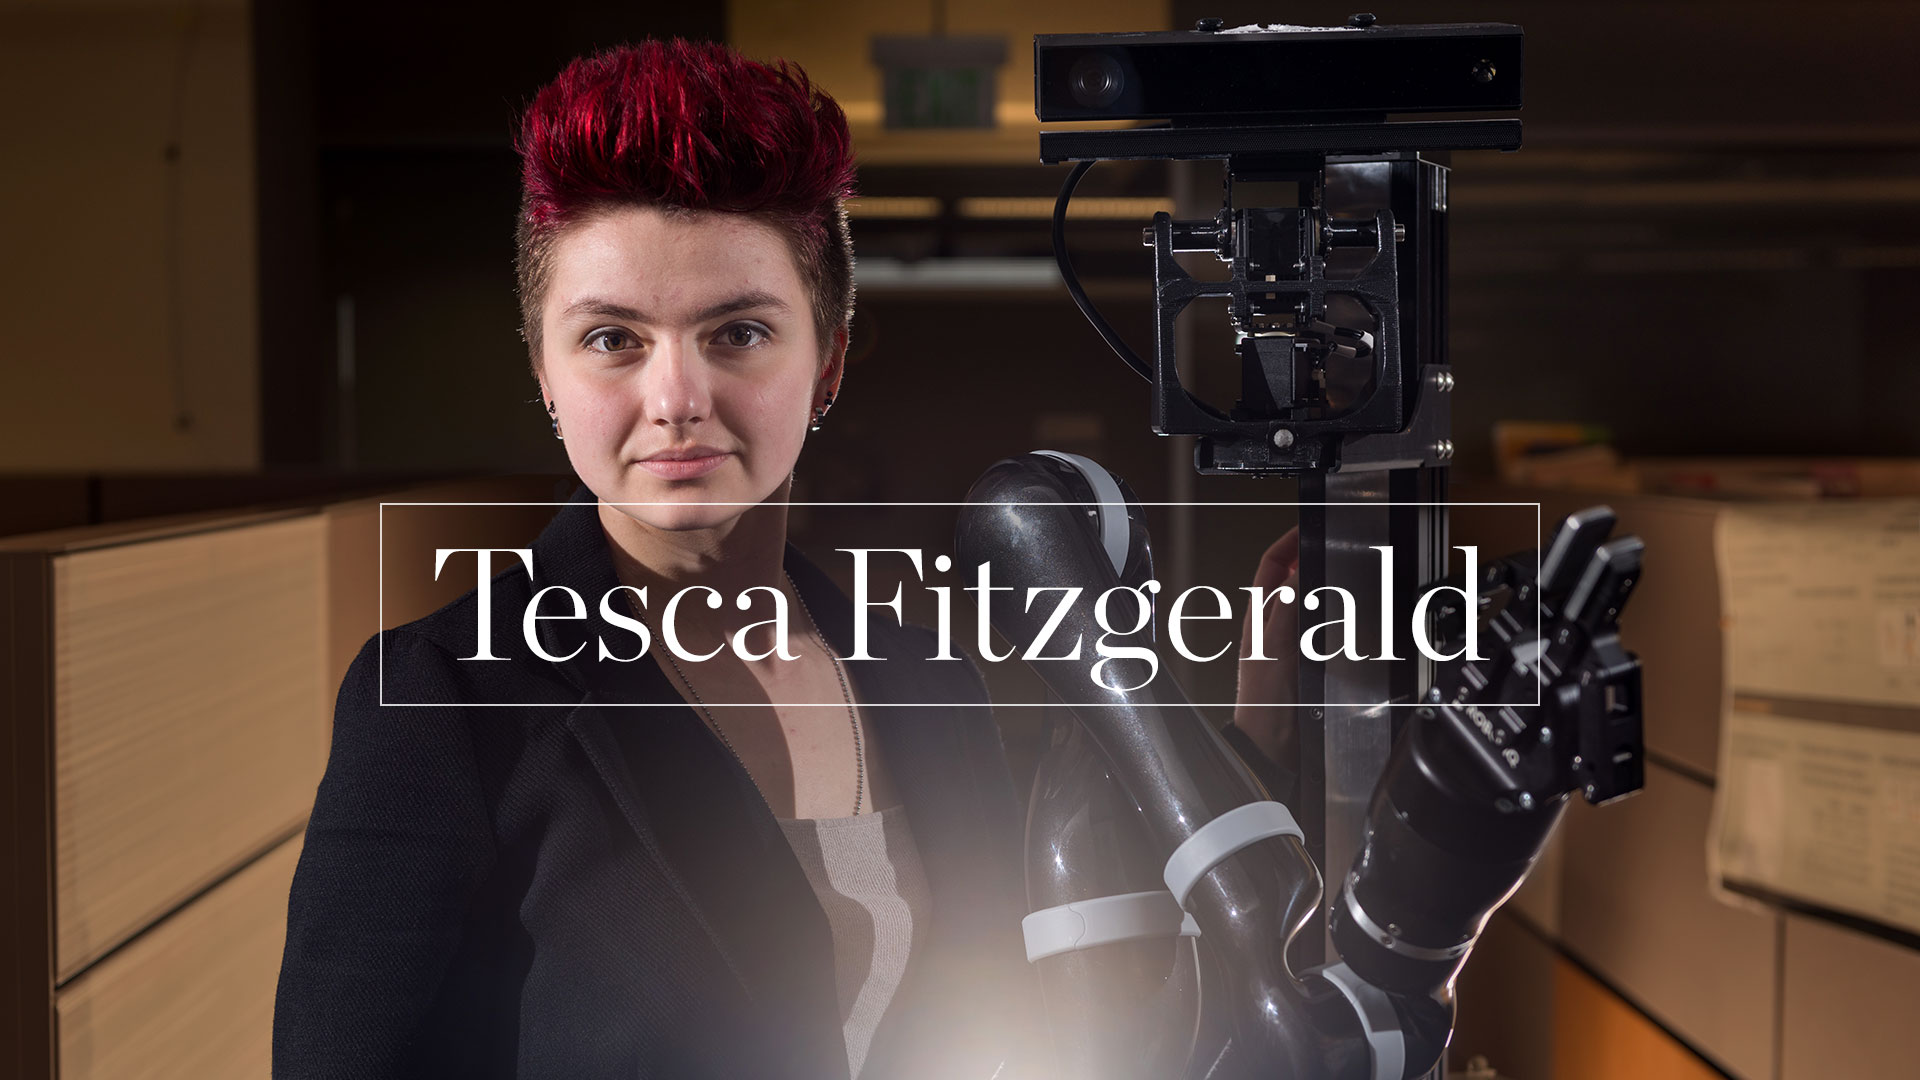 photo -  Tesca Fitzgerald standing with large robot in dark office setting 